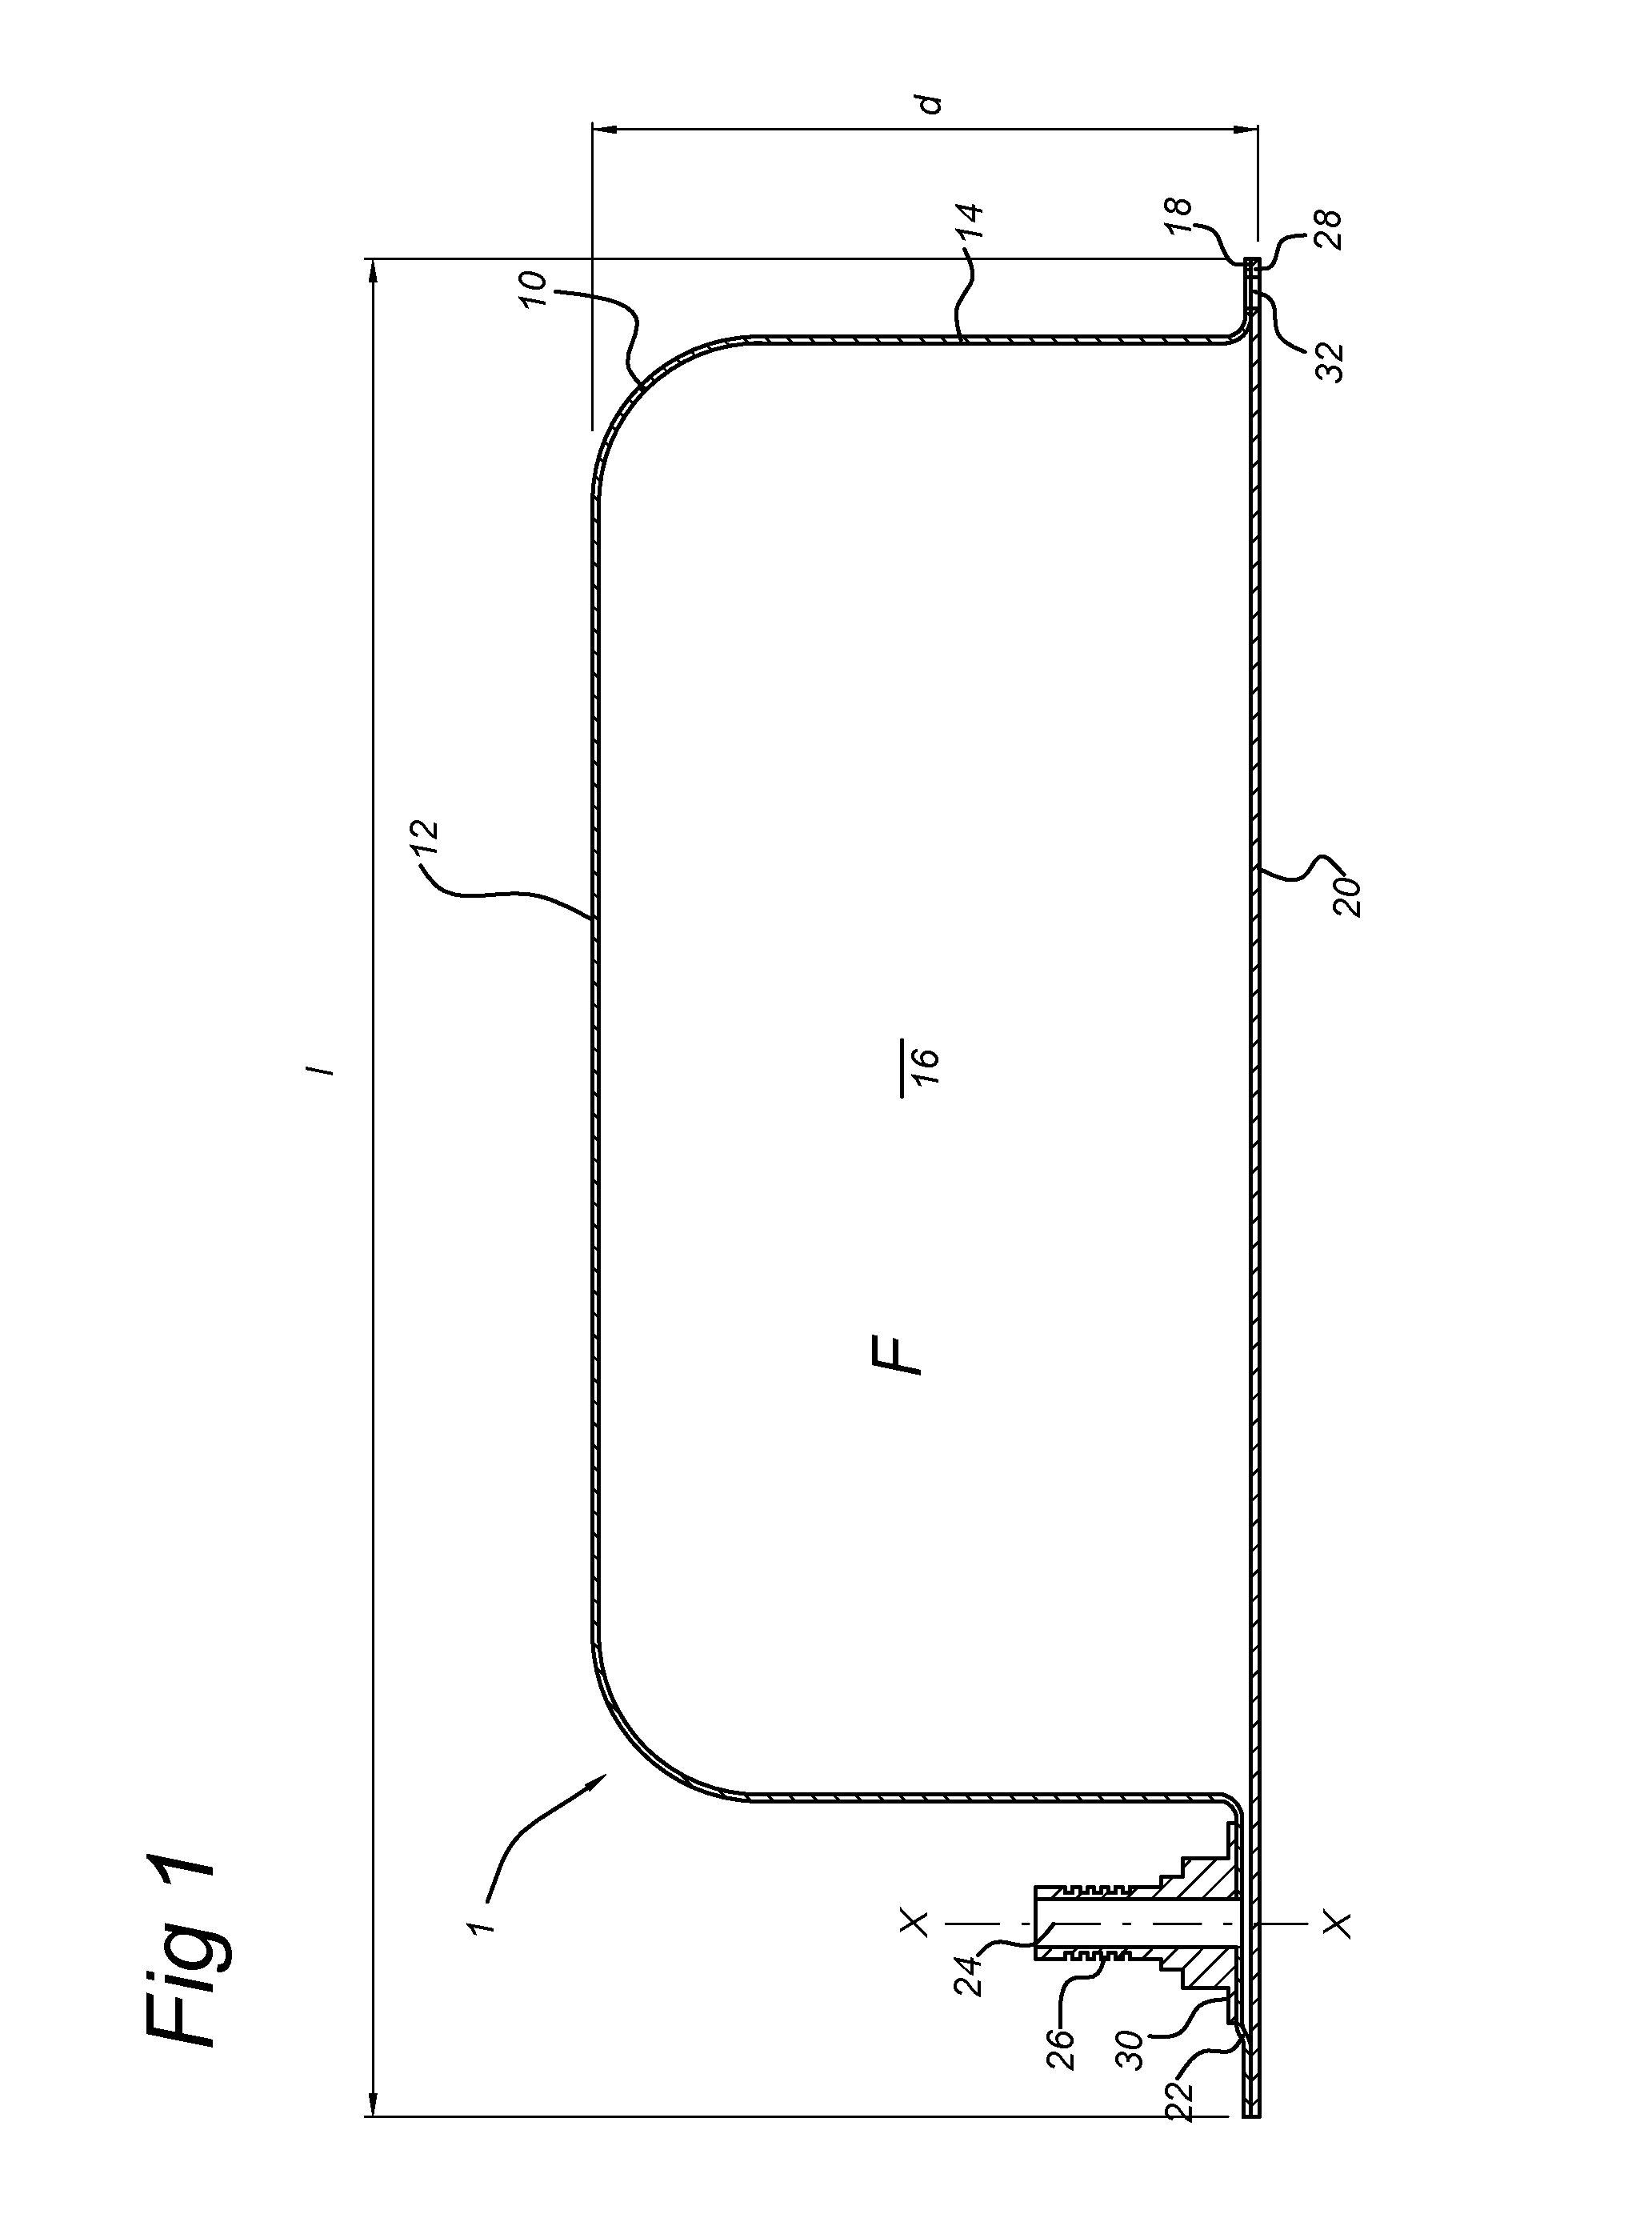 Flexible container with outlet